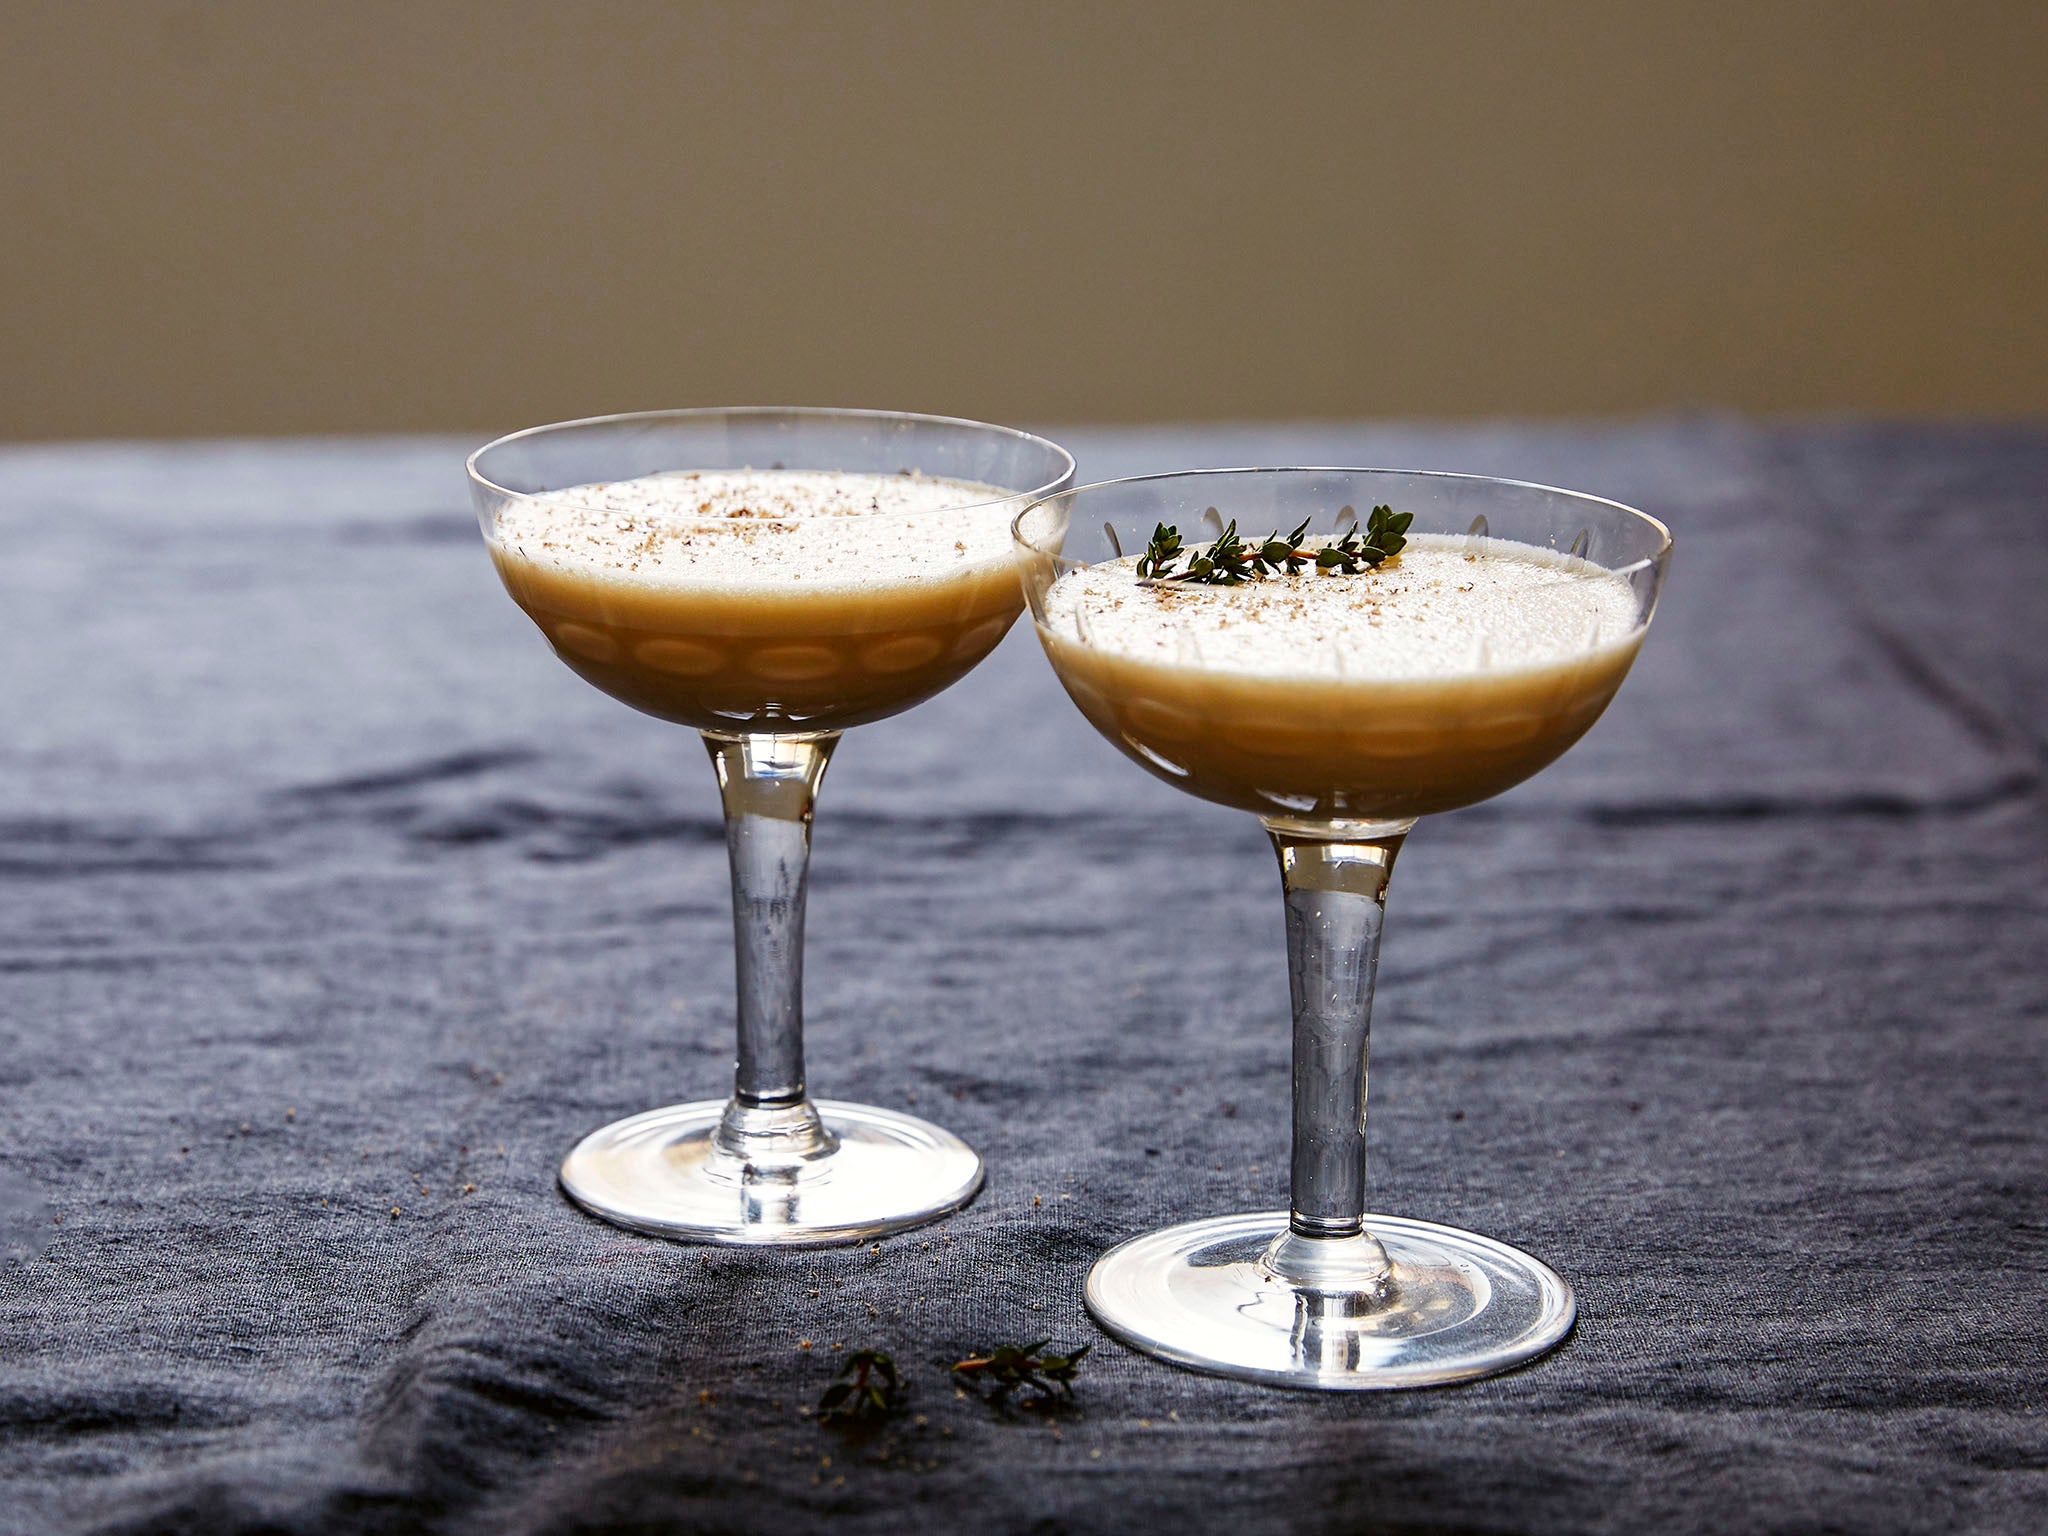 Egg nog is one of the most indulgently decadent and delicious of all traditional festive drinks